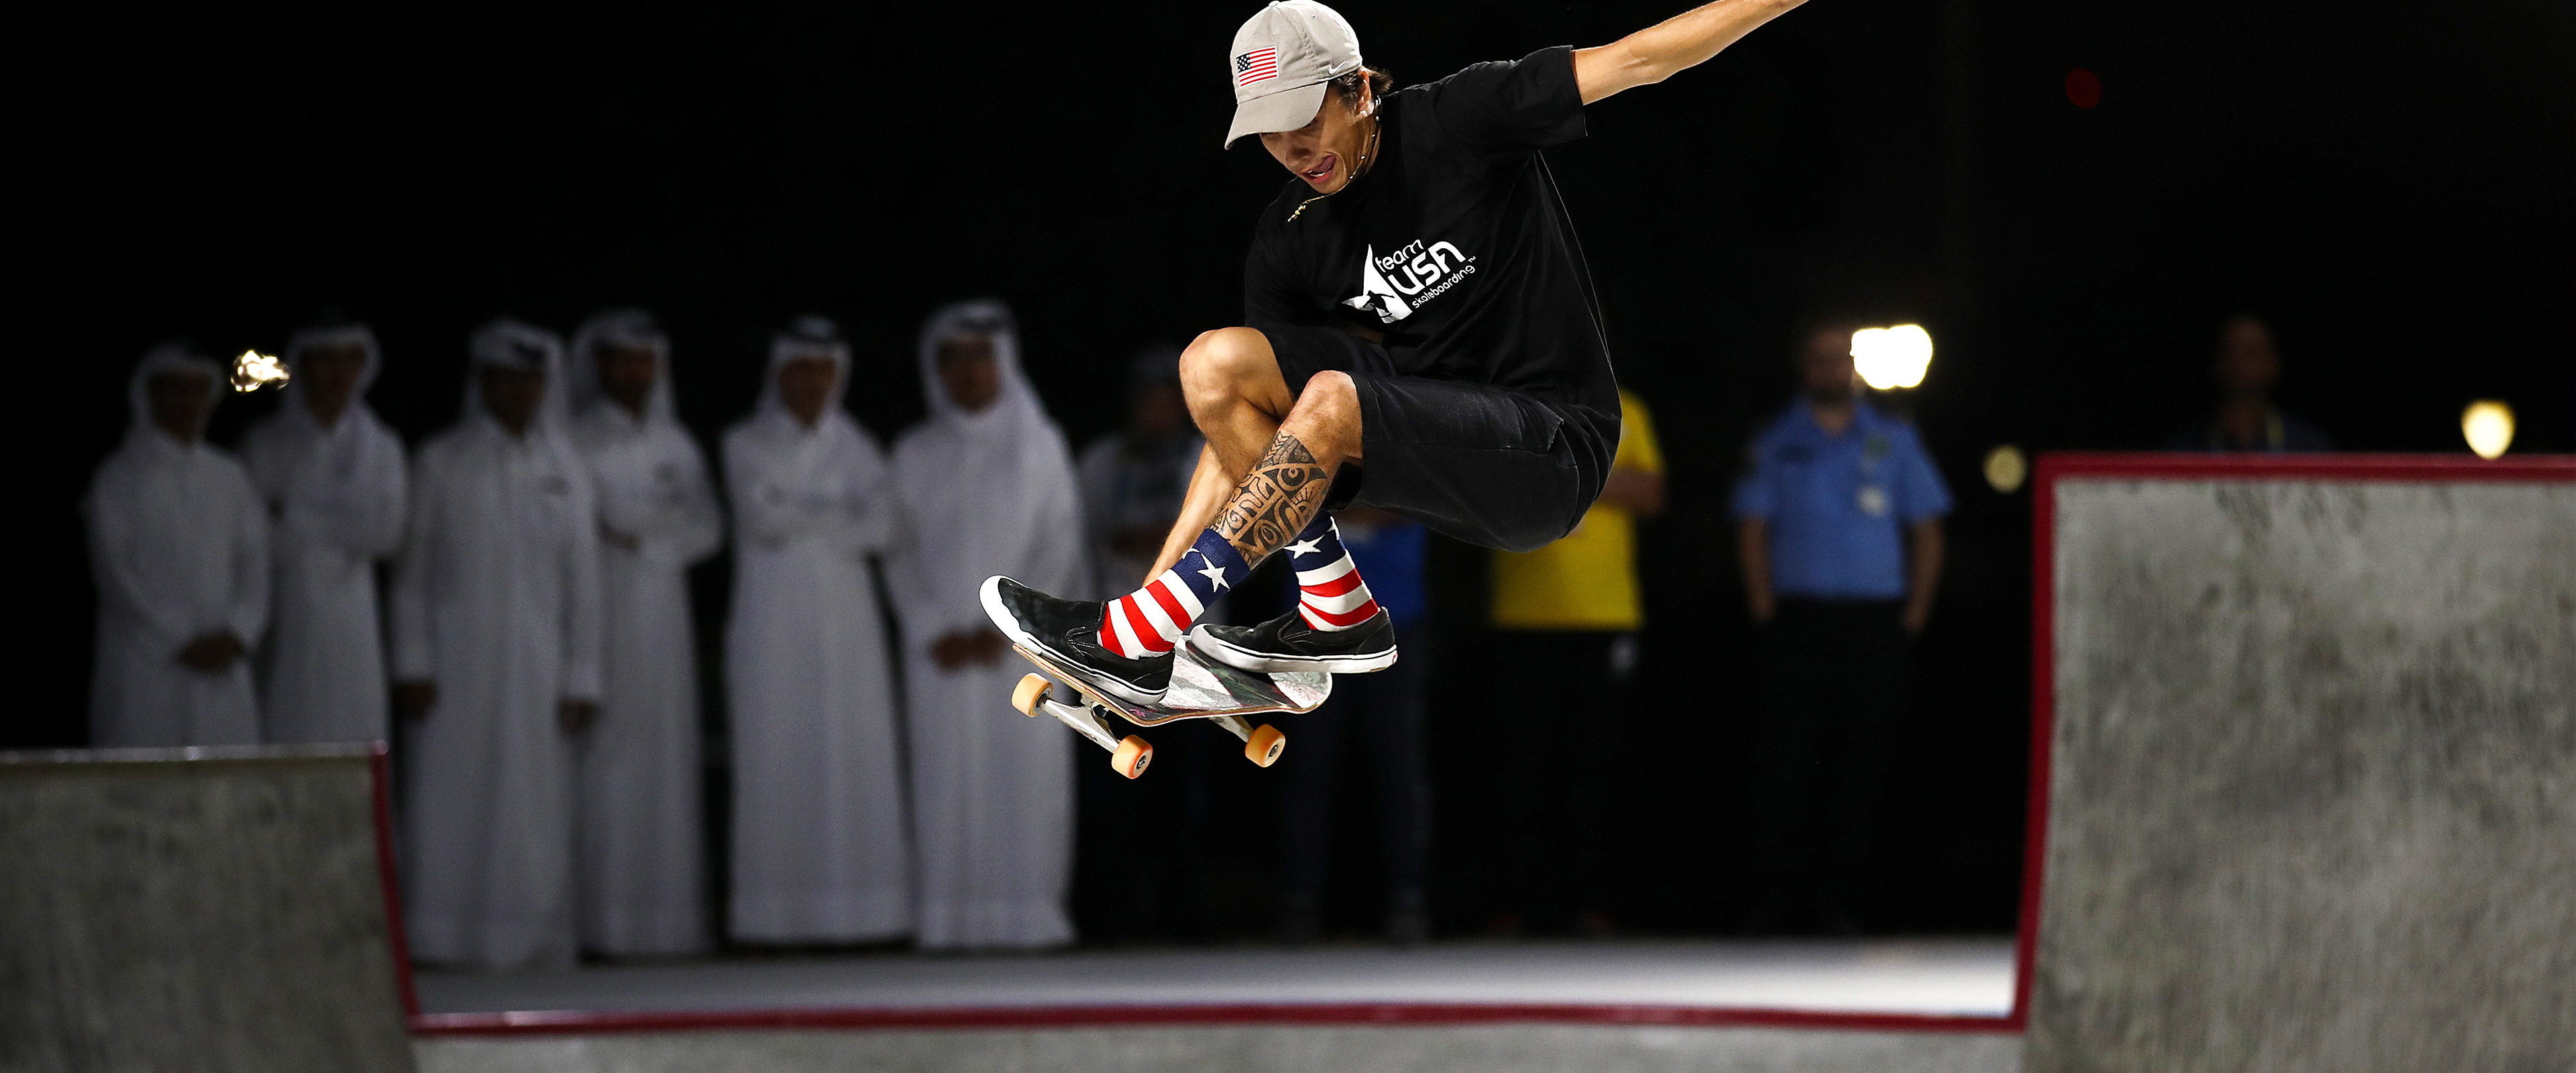 Skateboarding - the show, the entertainment, the pace